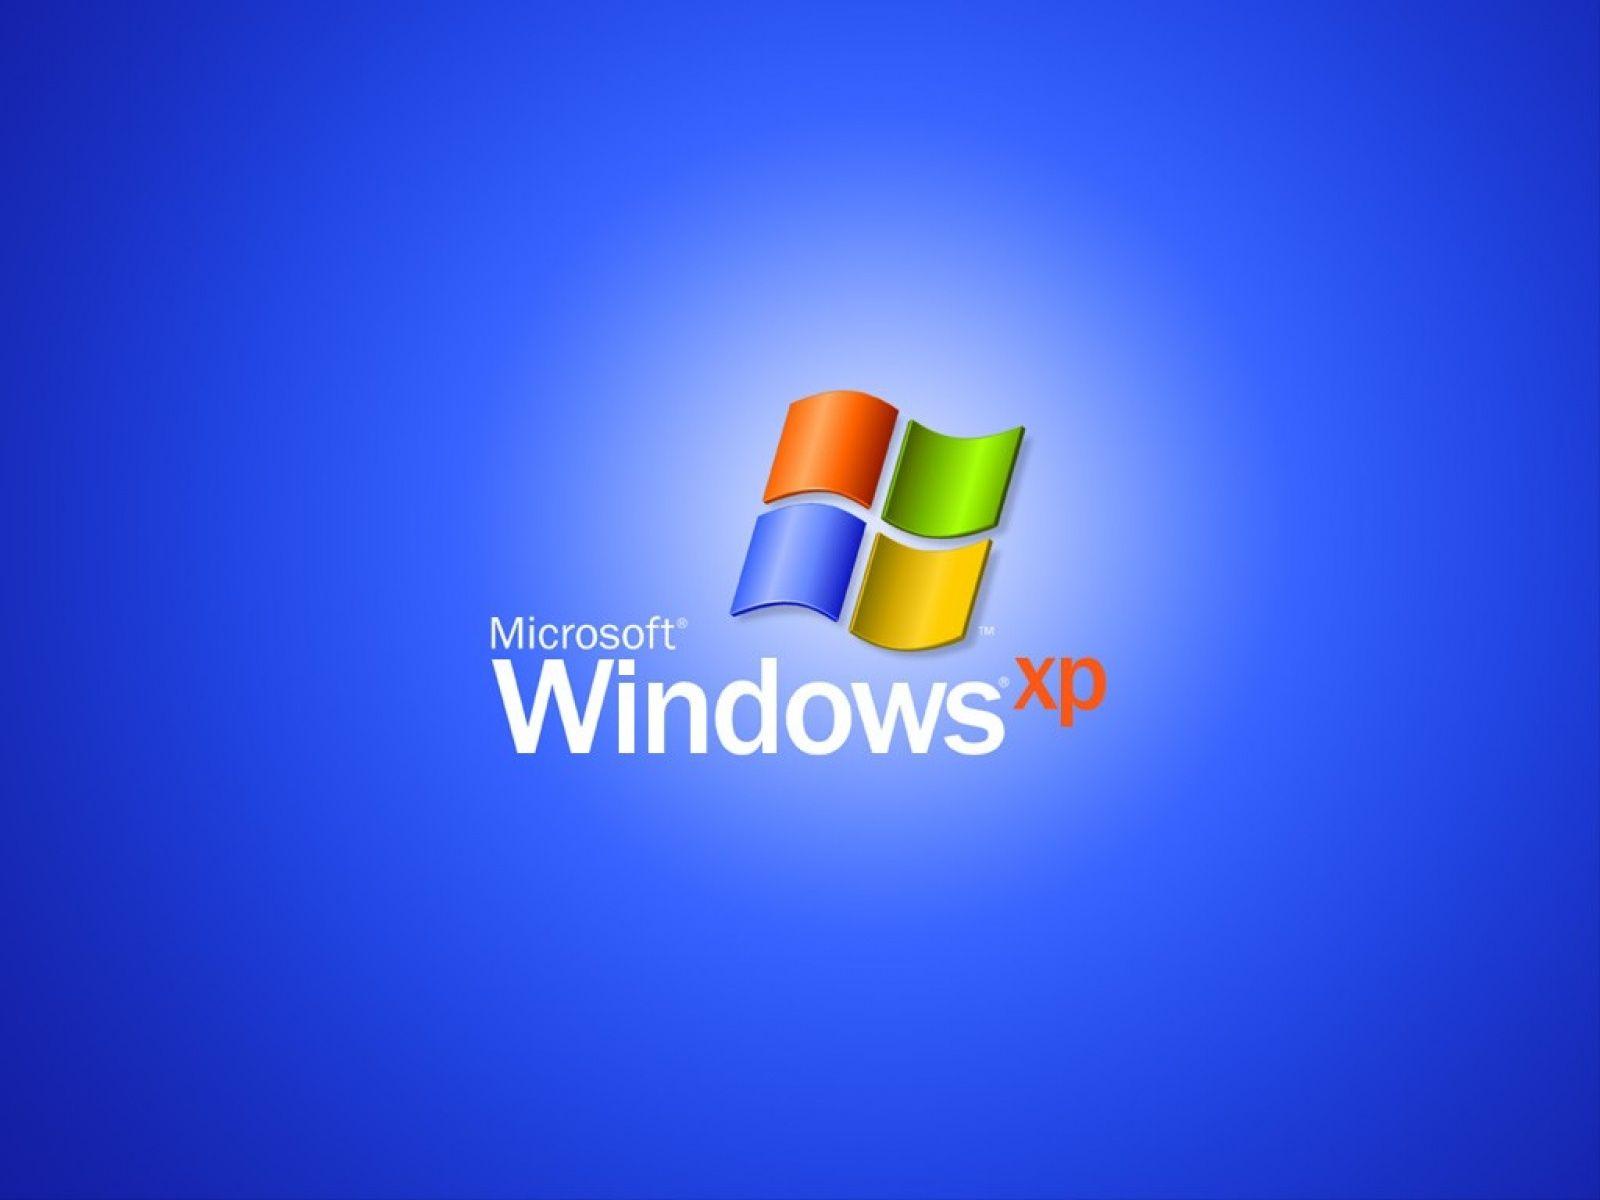 Windows XP Professional Wallpapers - Top Free Windows XP Professional